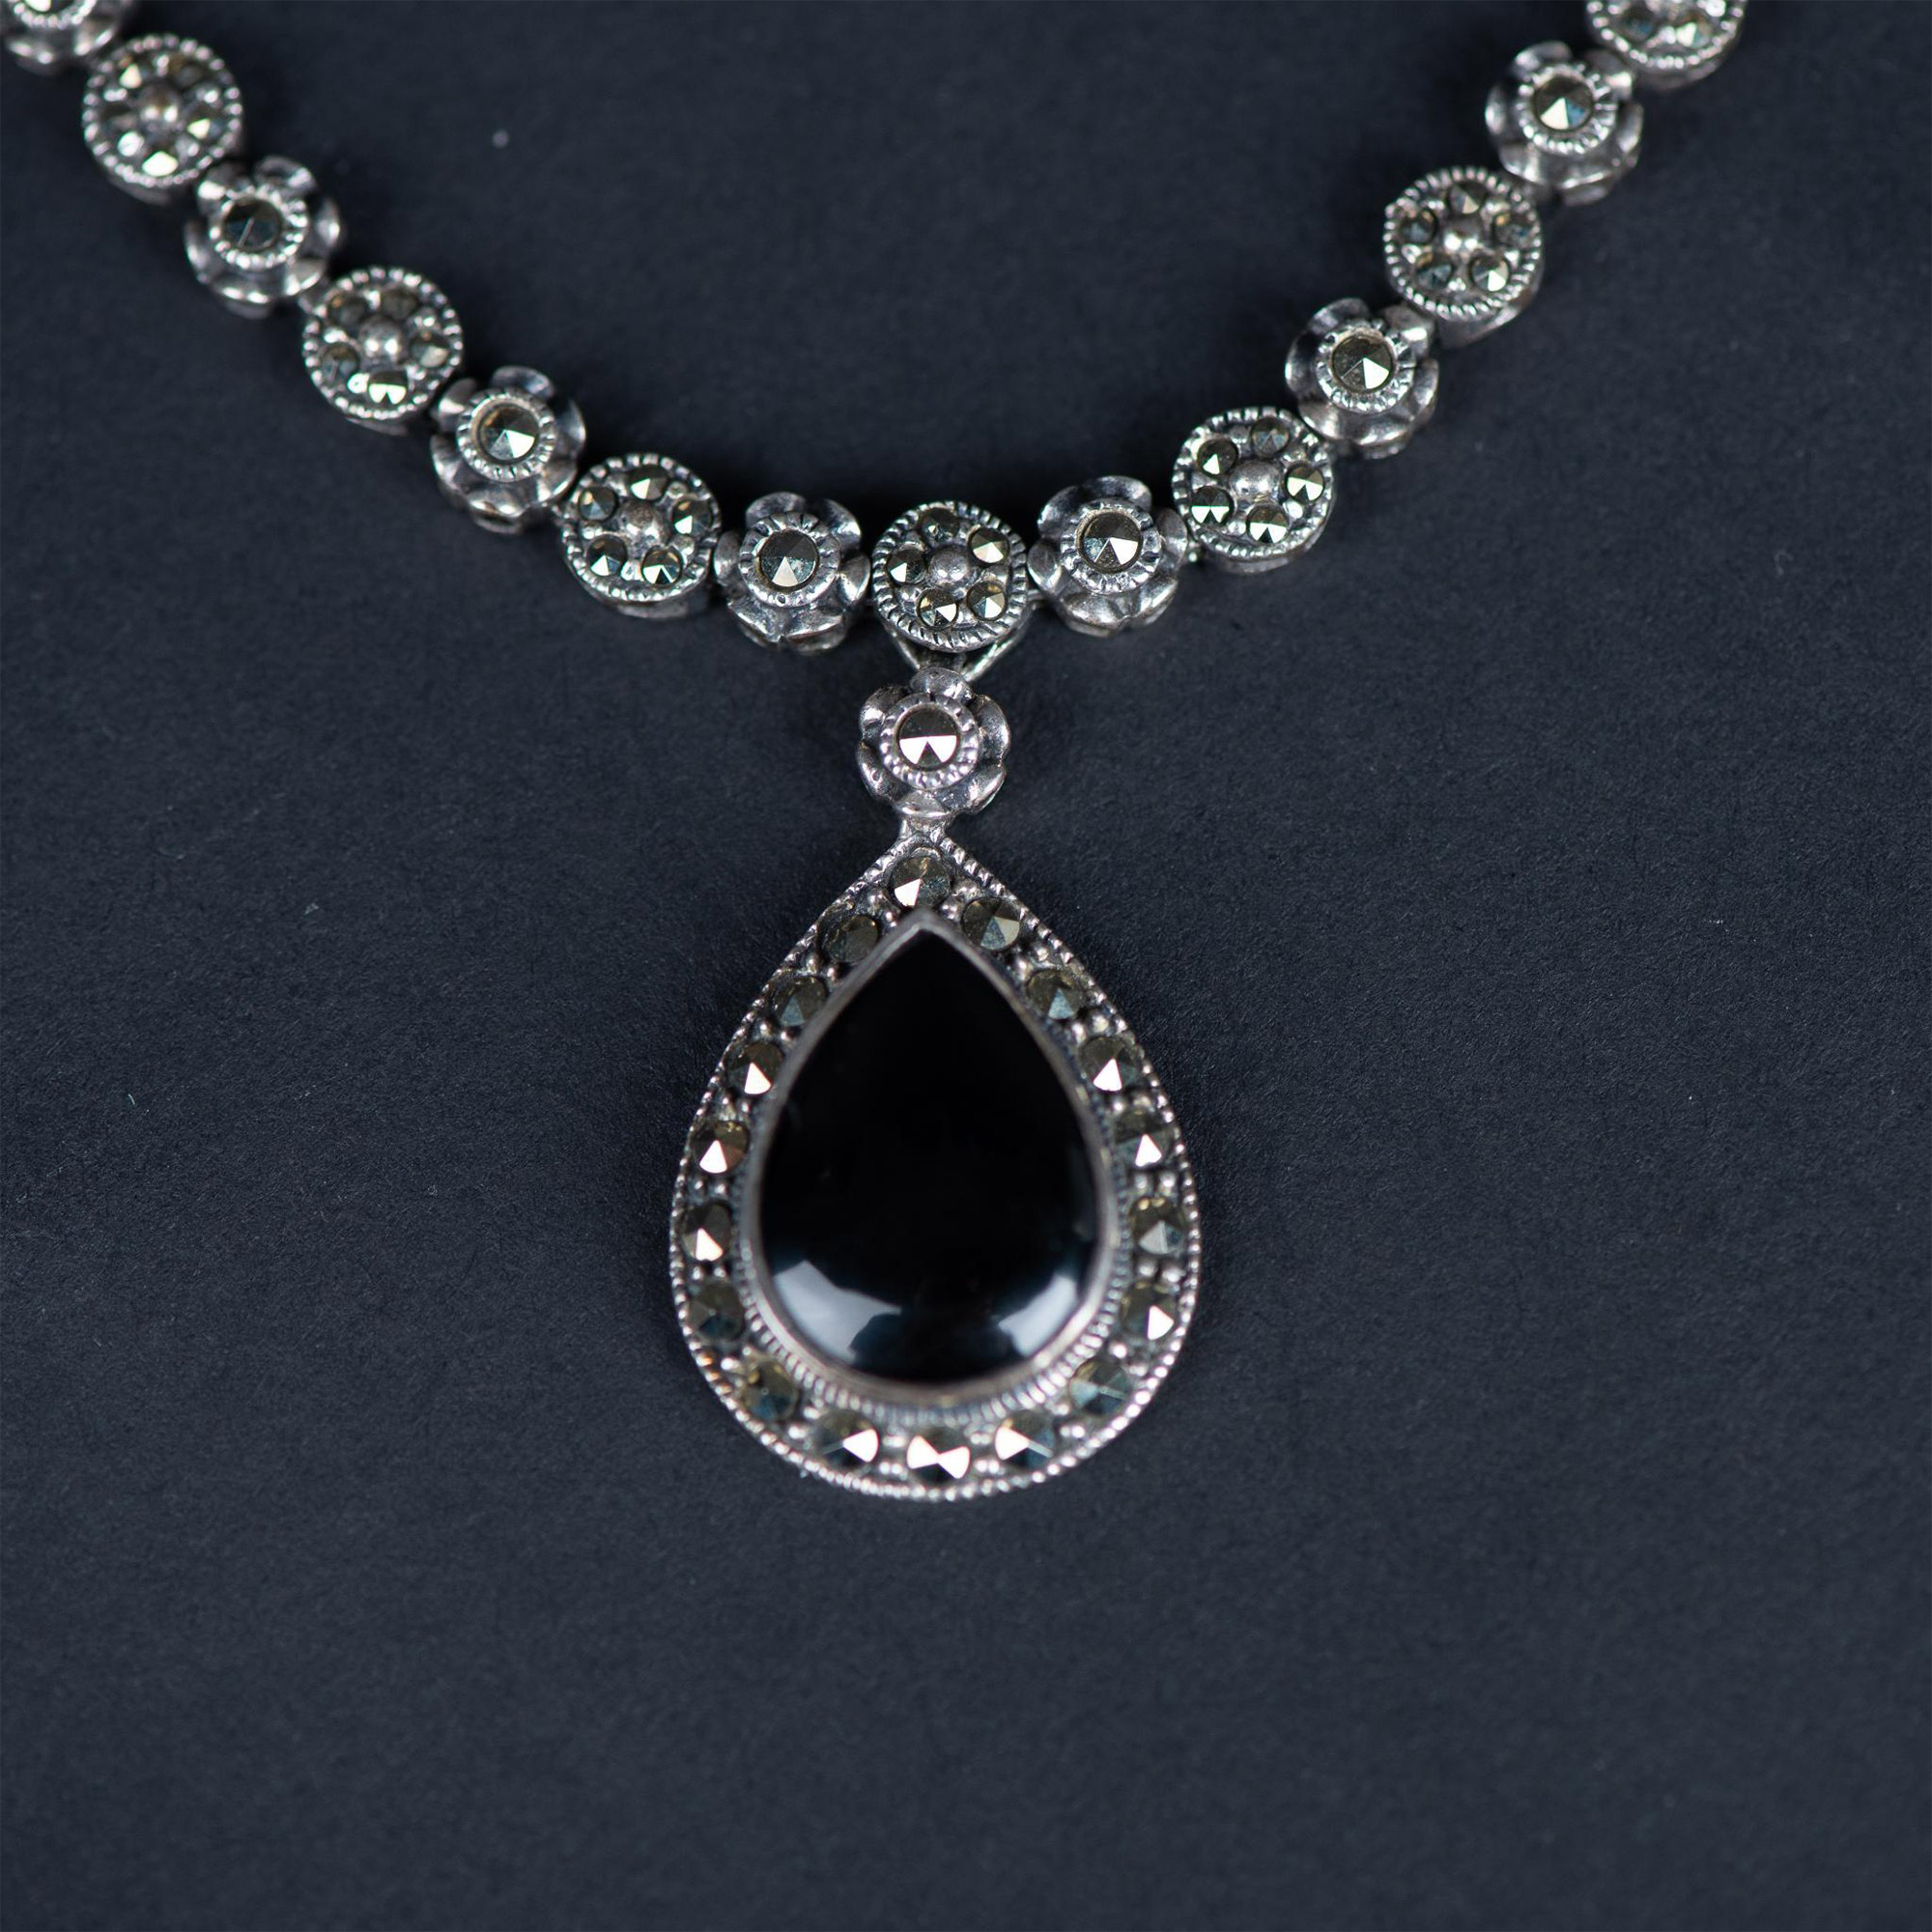 Pretty Sterling Silver, Marcasite, and Onyx Necklace - Image 5 of 6